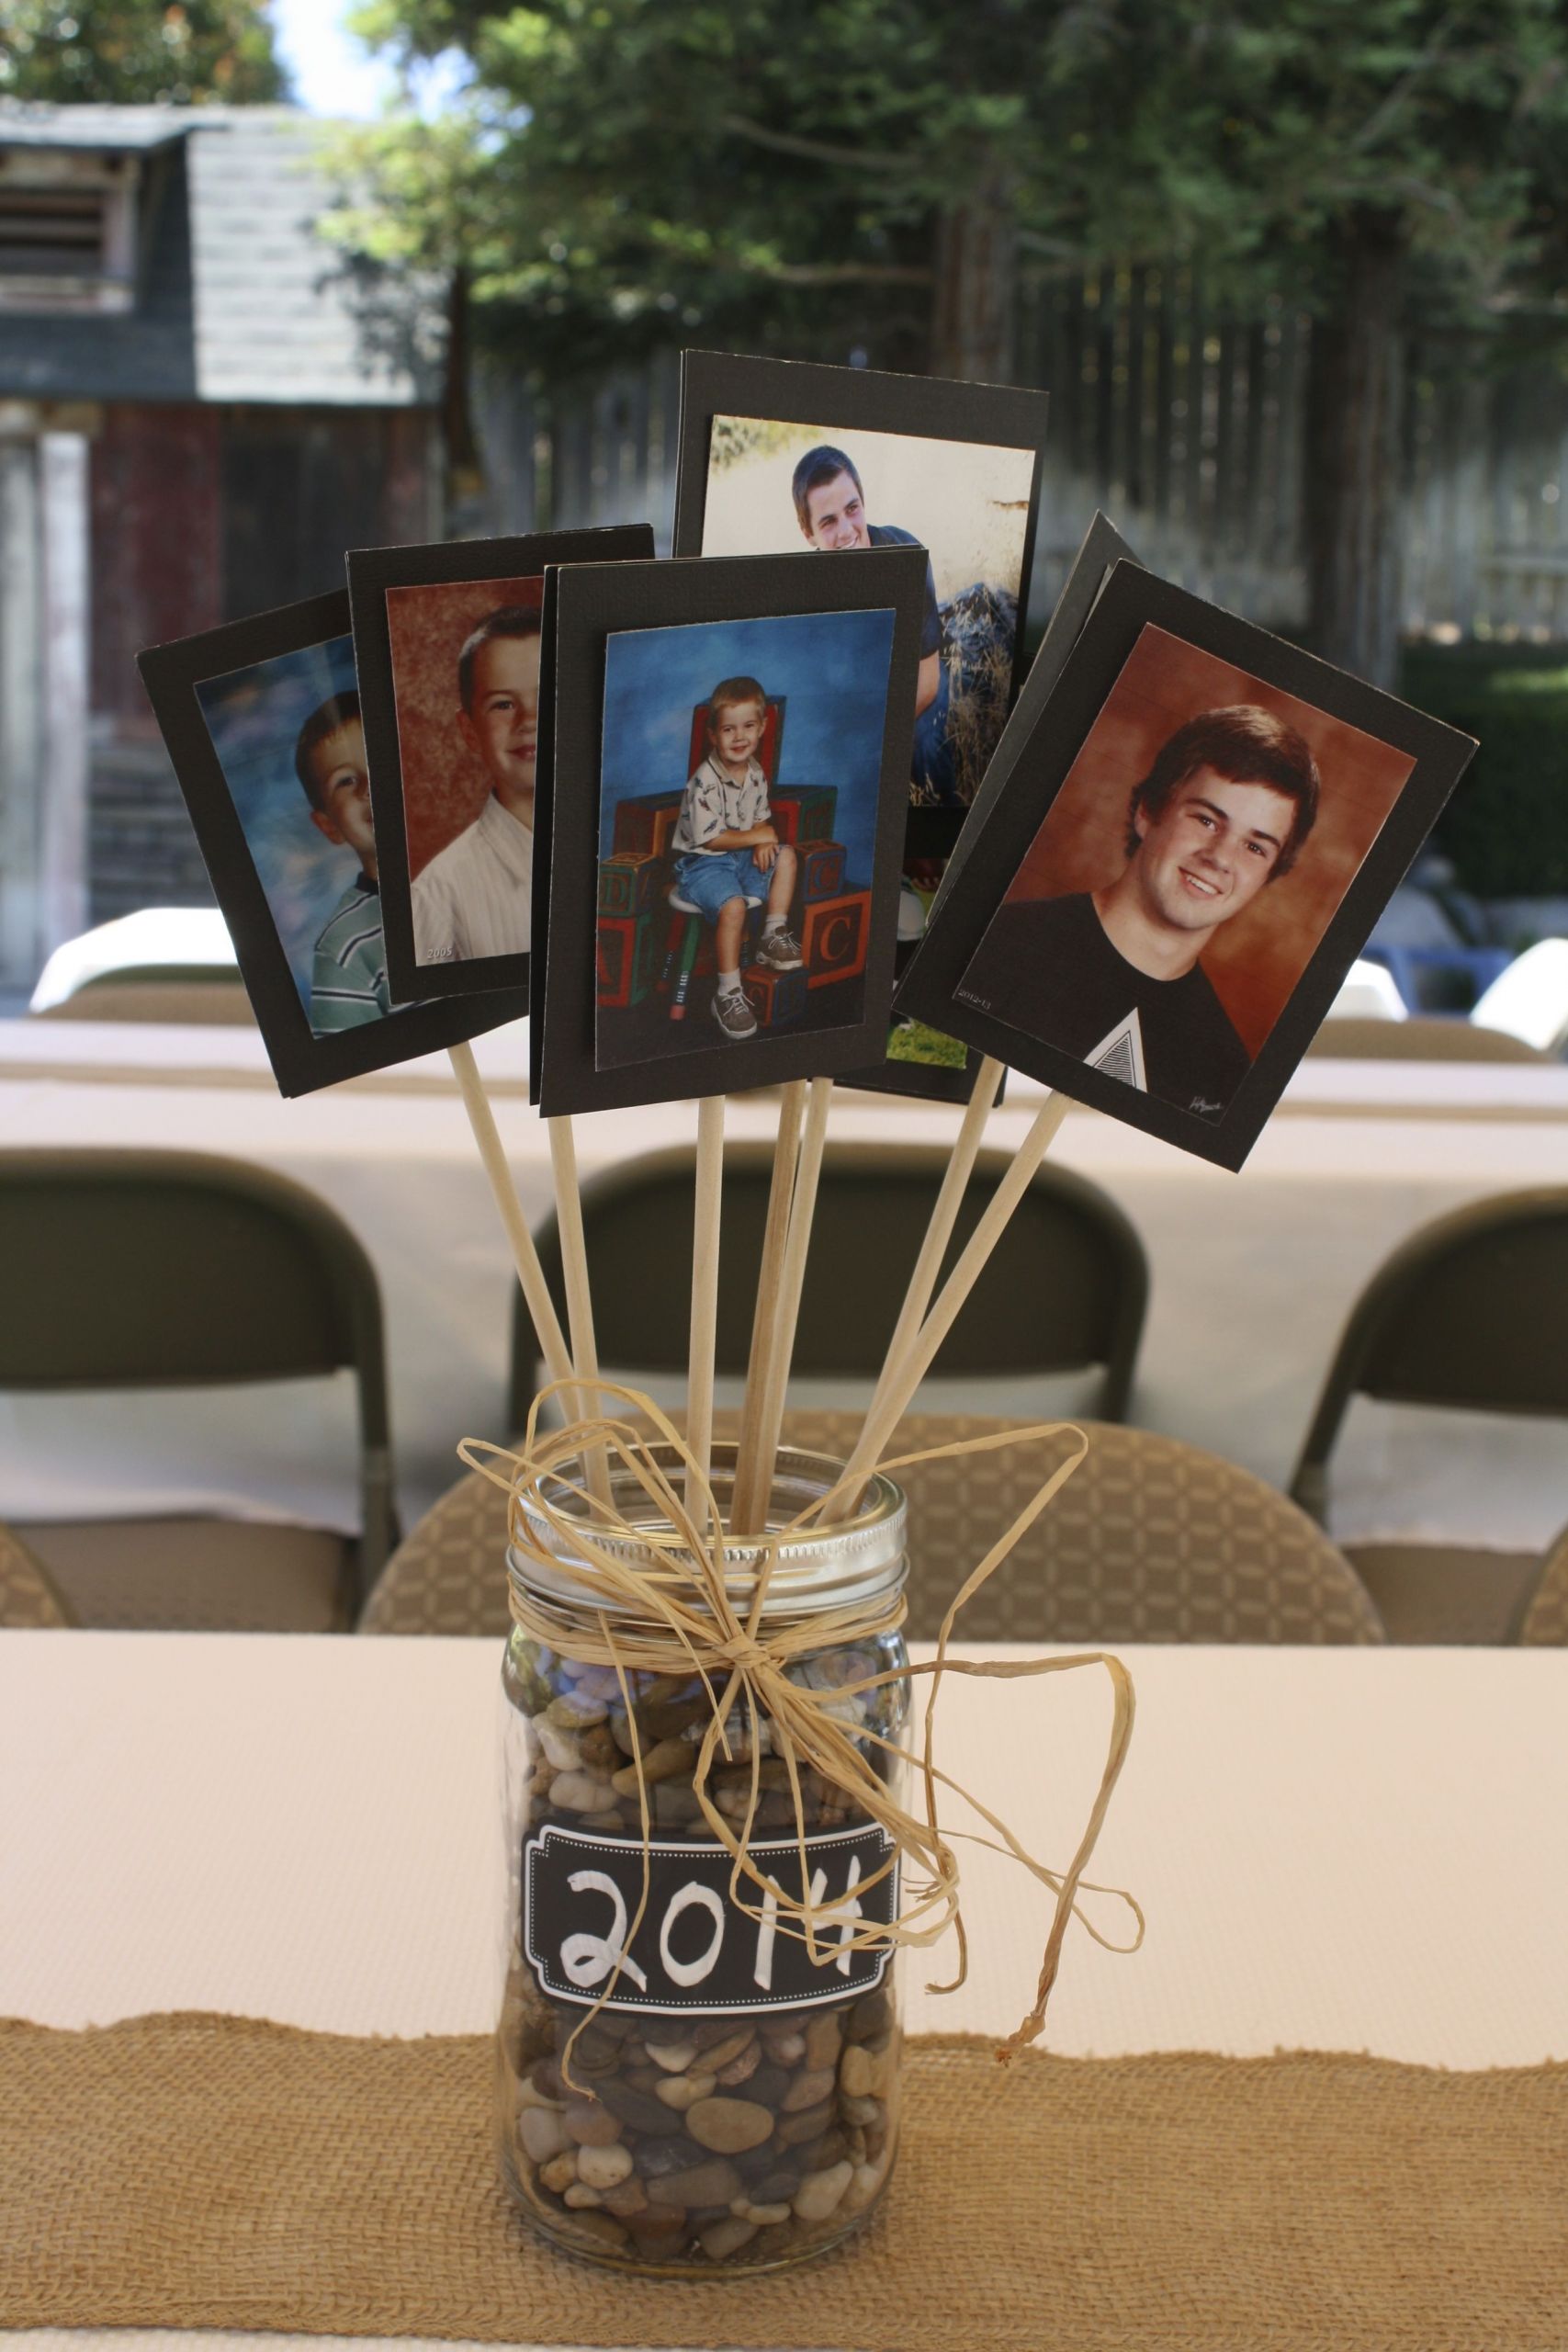 Graduation Party Decoration Ideas For Guys
 Centerpiece for tables at a graduation party Good for